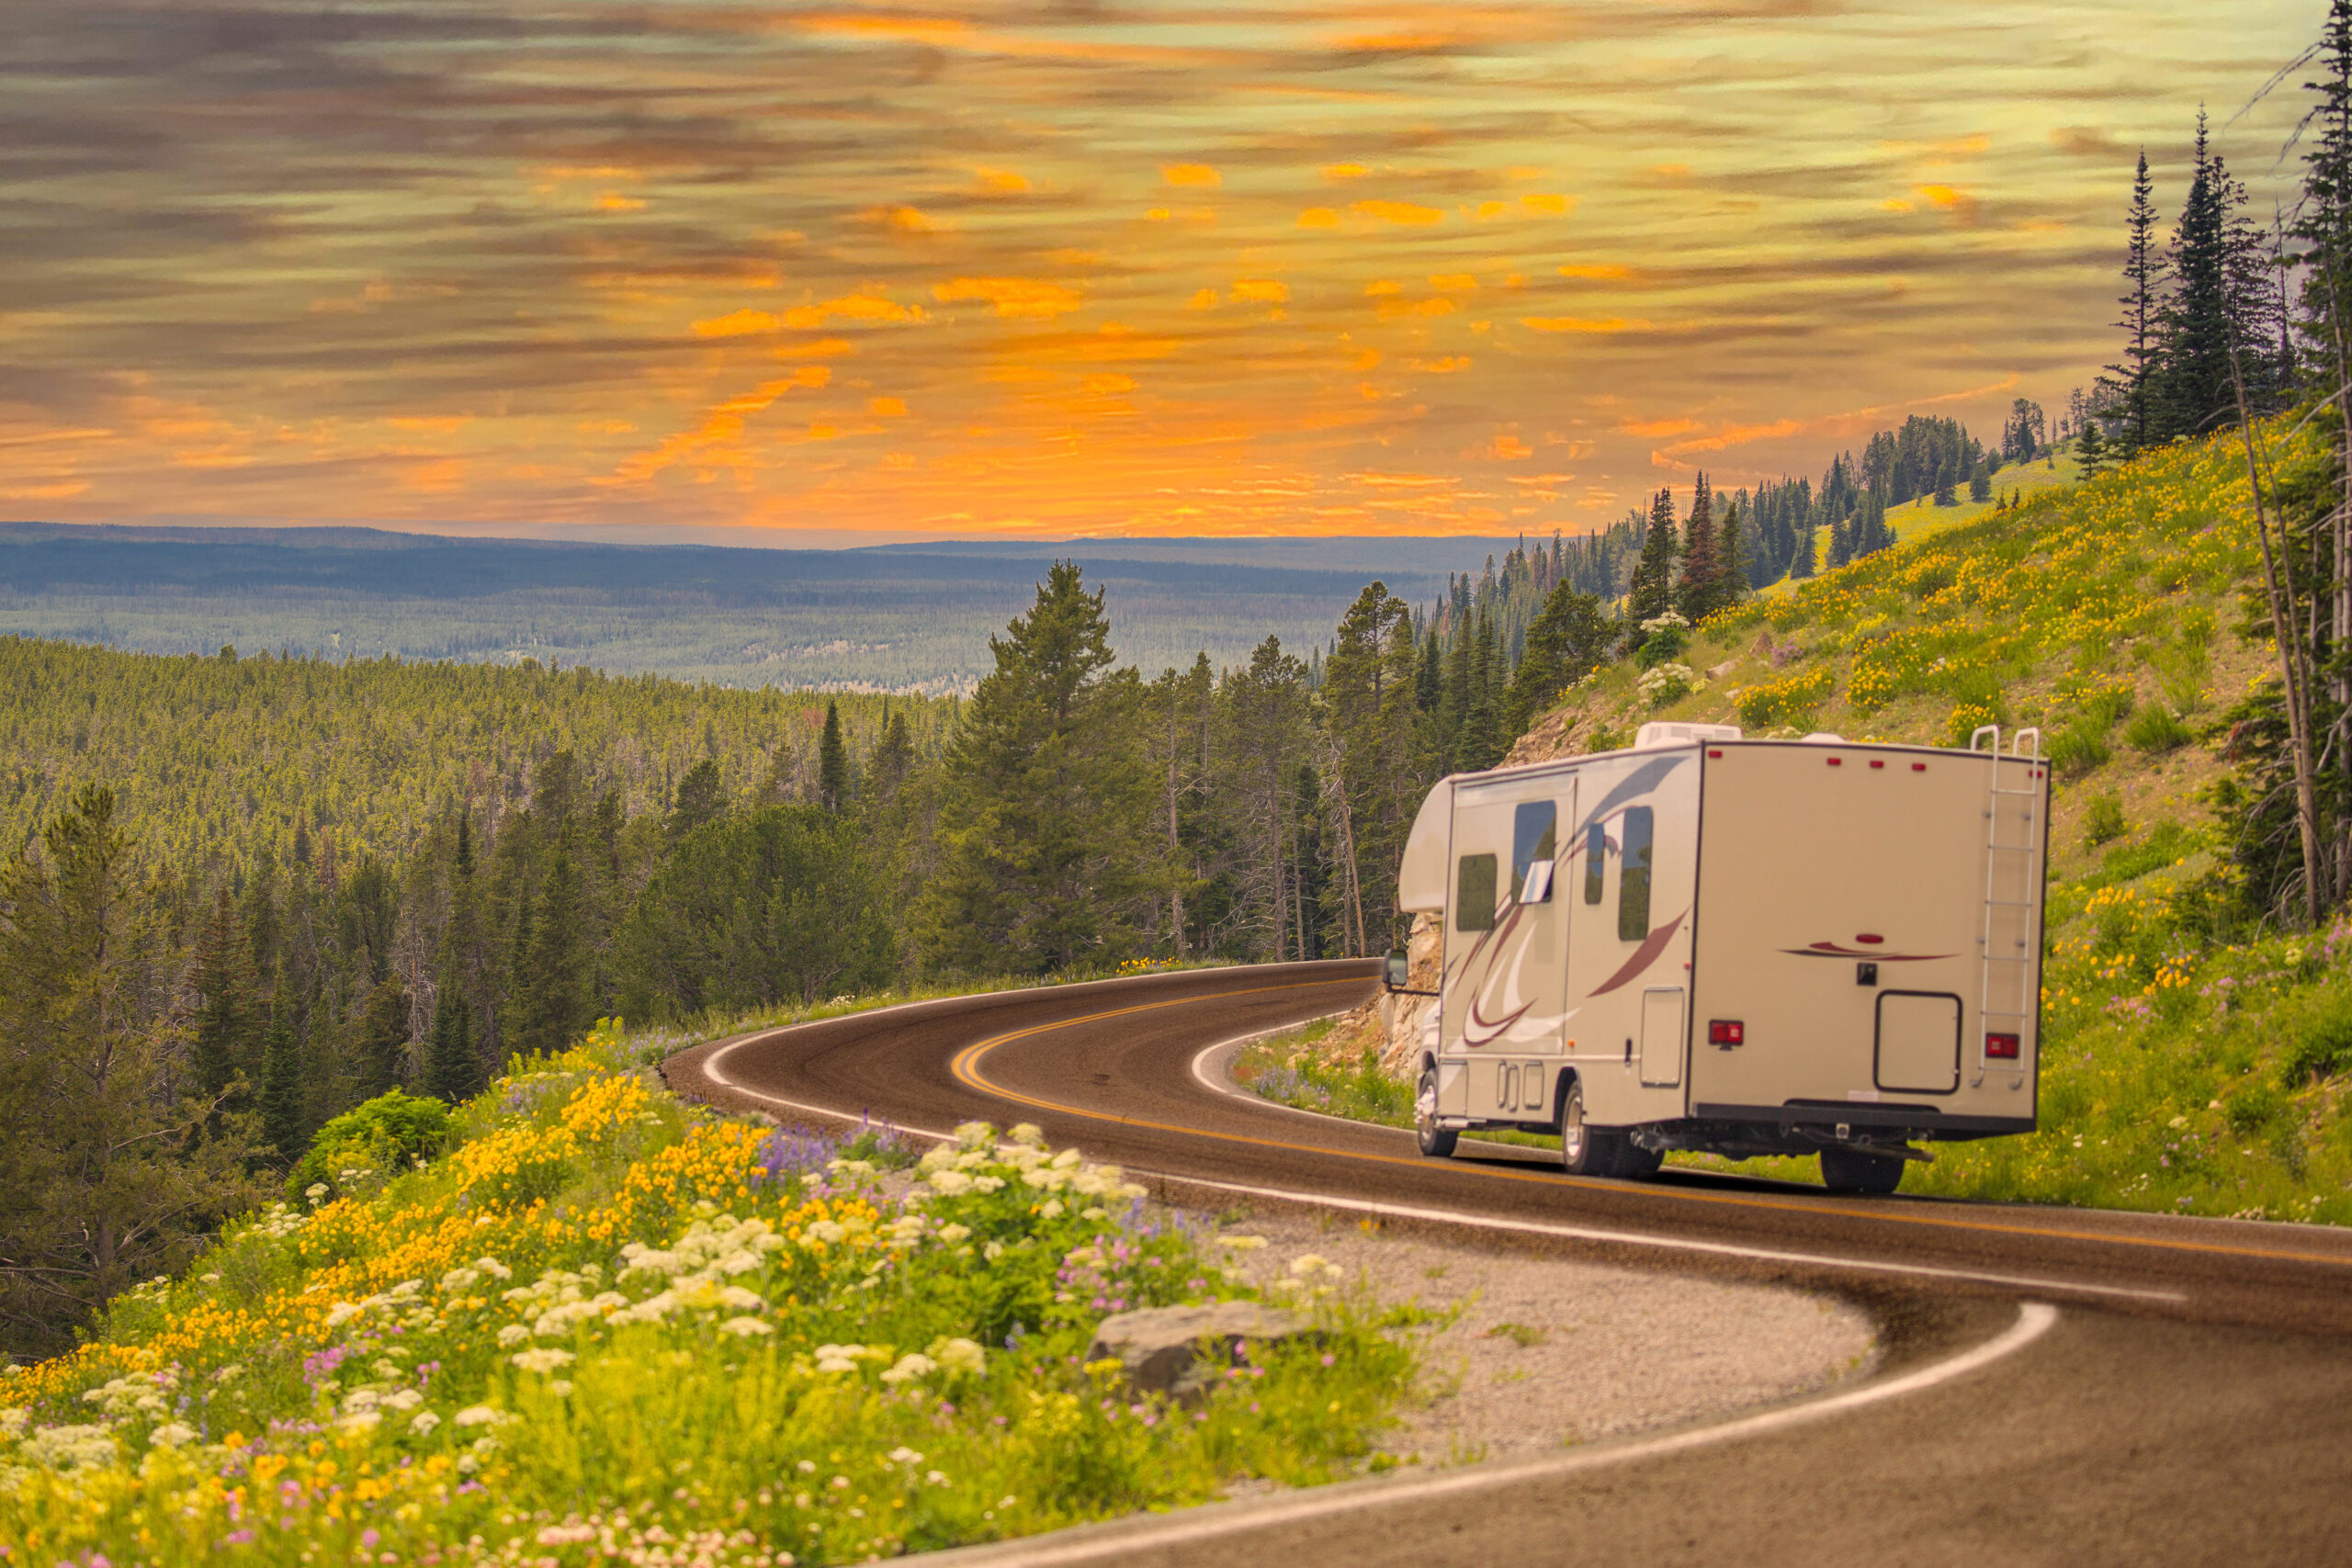 A motorhome purchased with an RV loan travels down a twisty, scenic mountain road in Tennessee.